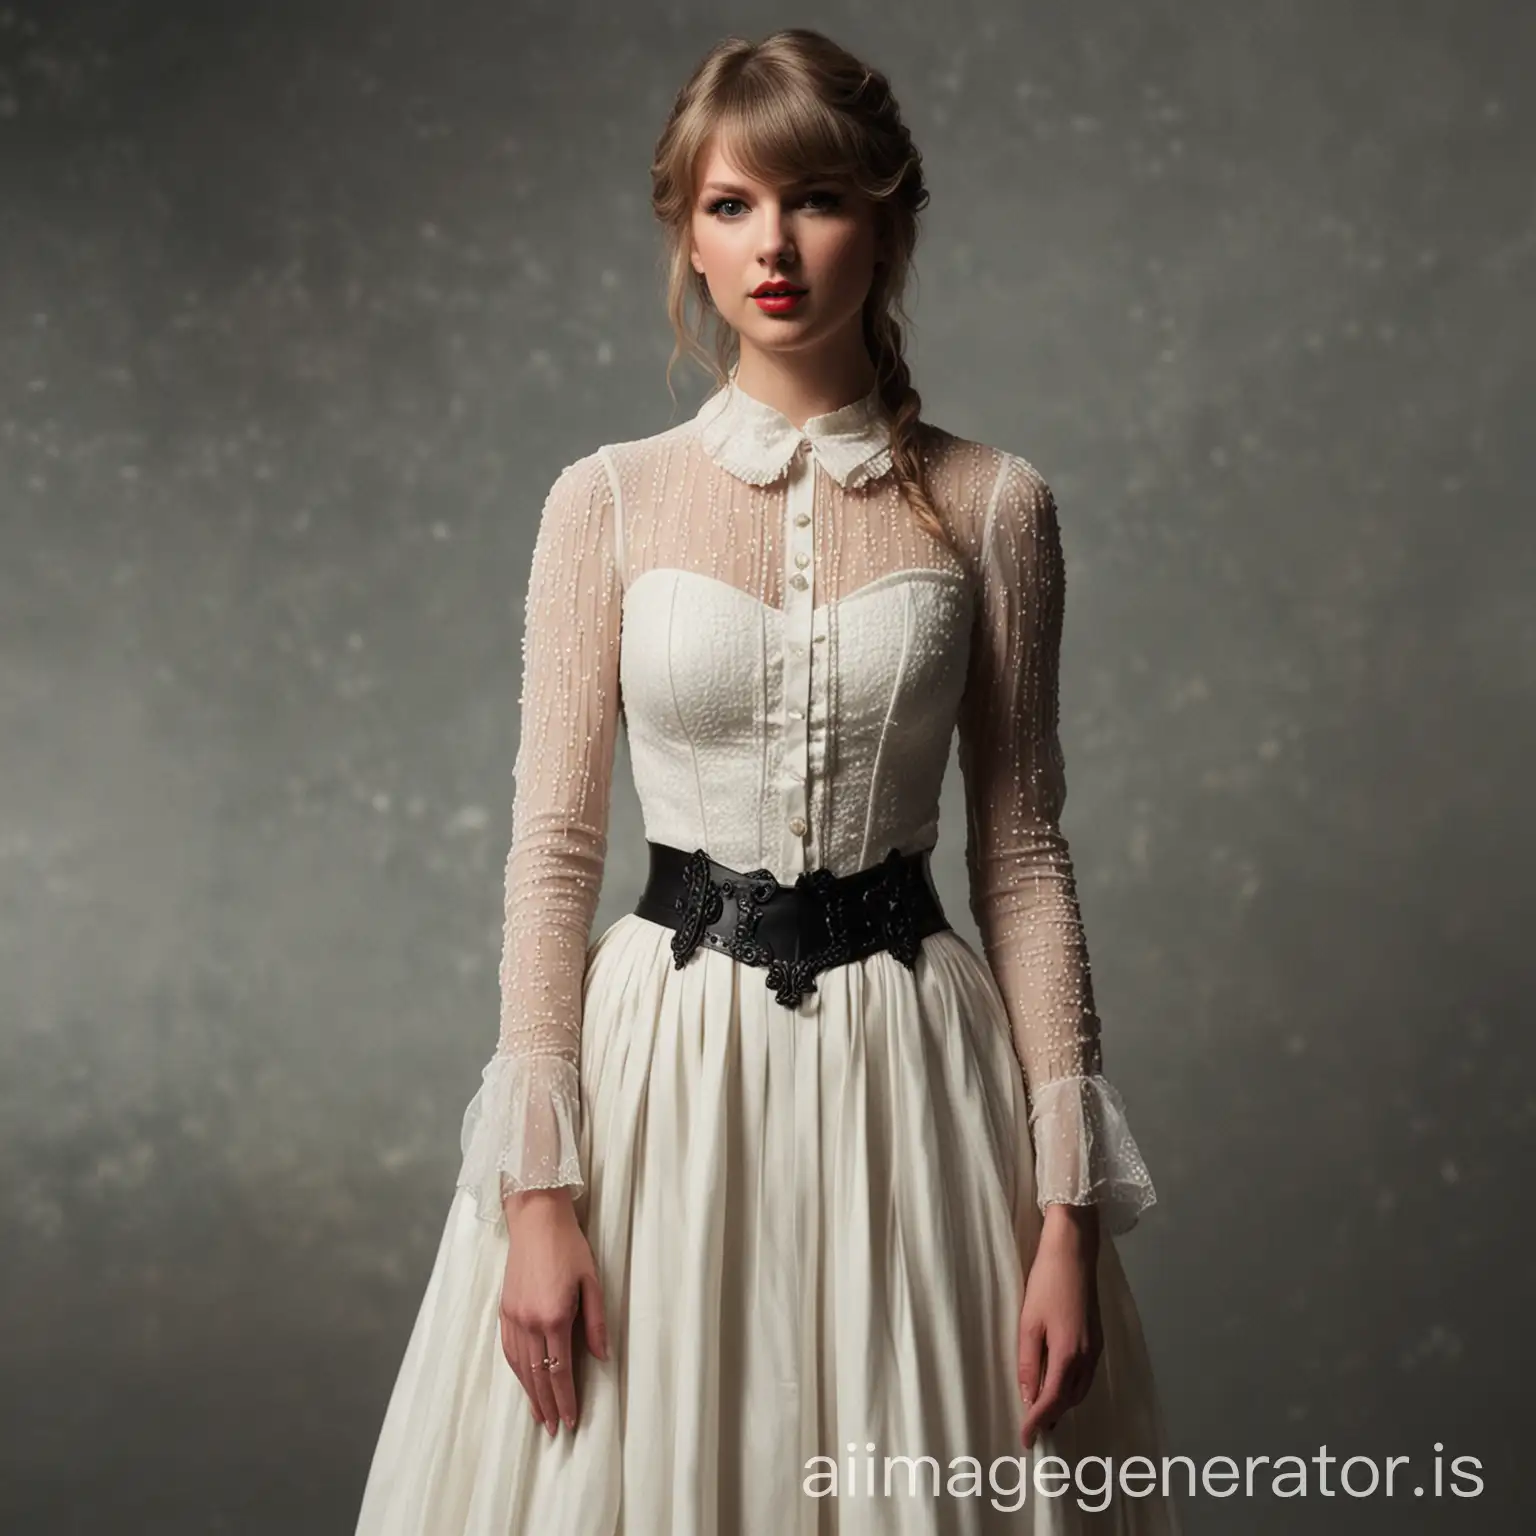 Taylor swift concert outfit for the tortured poets department album concert Victorian ethereal look